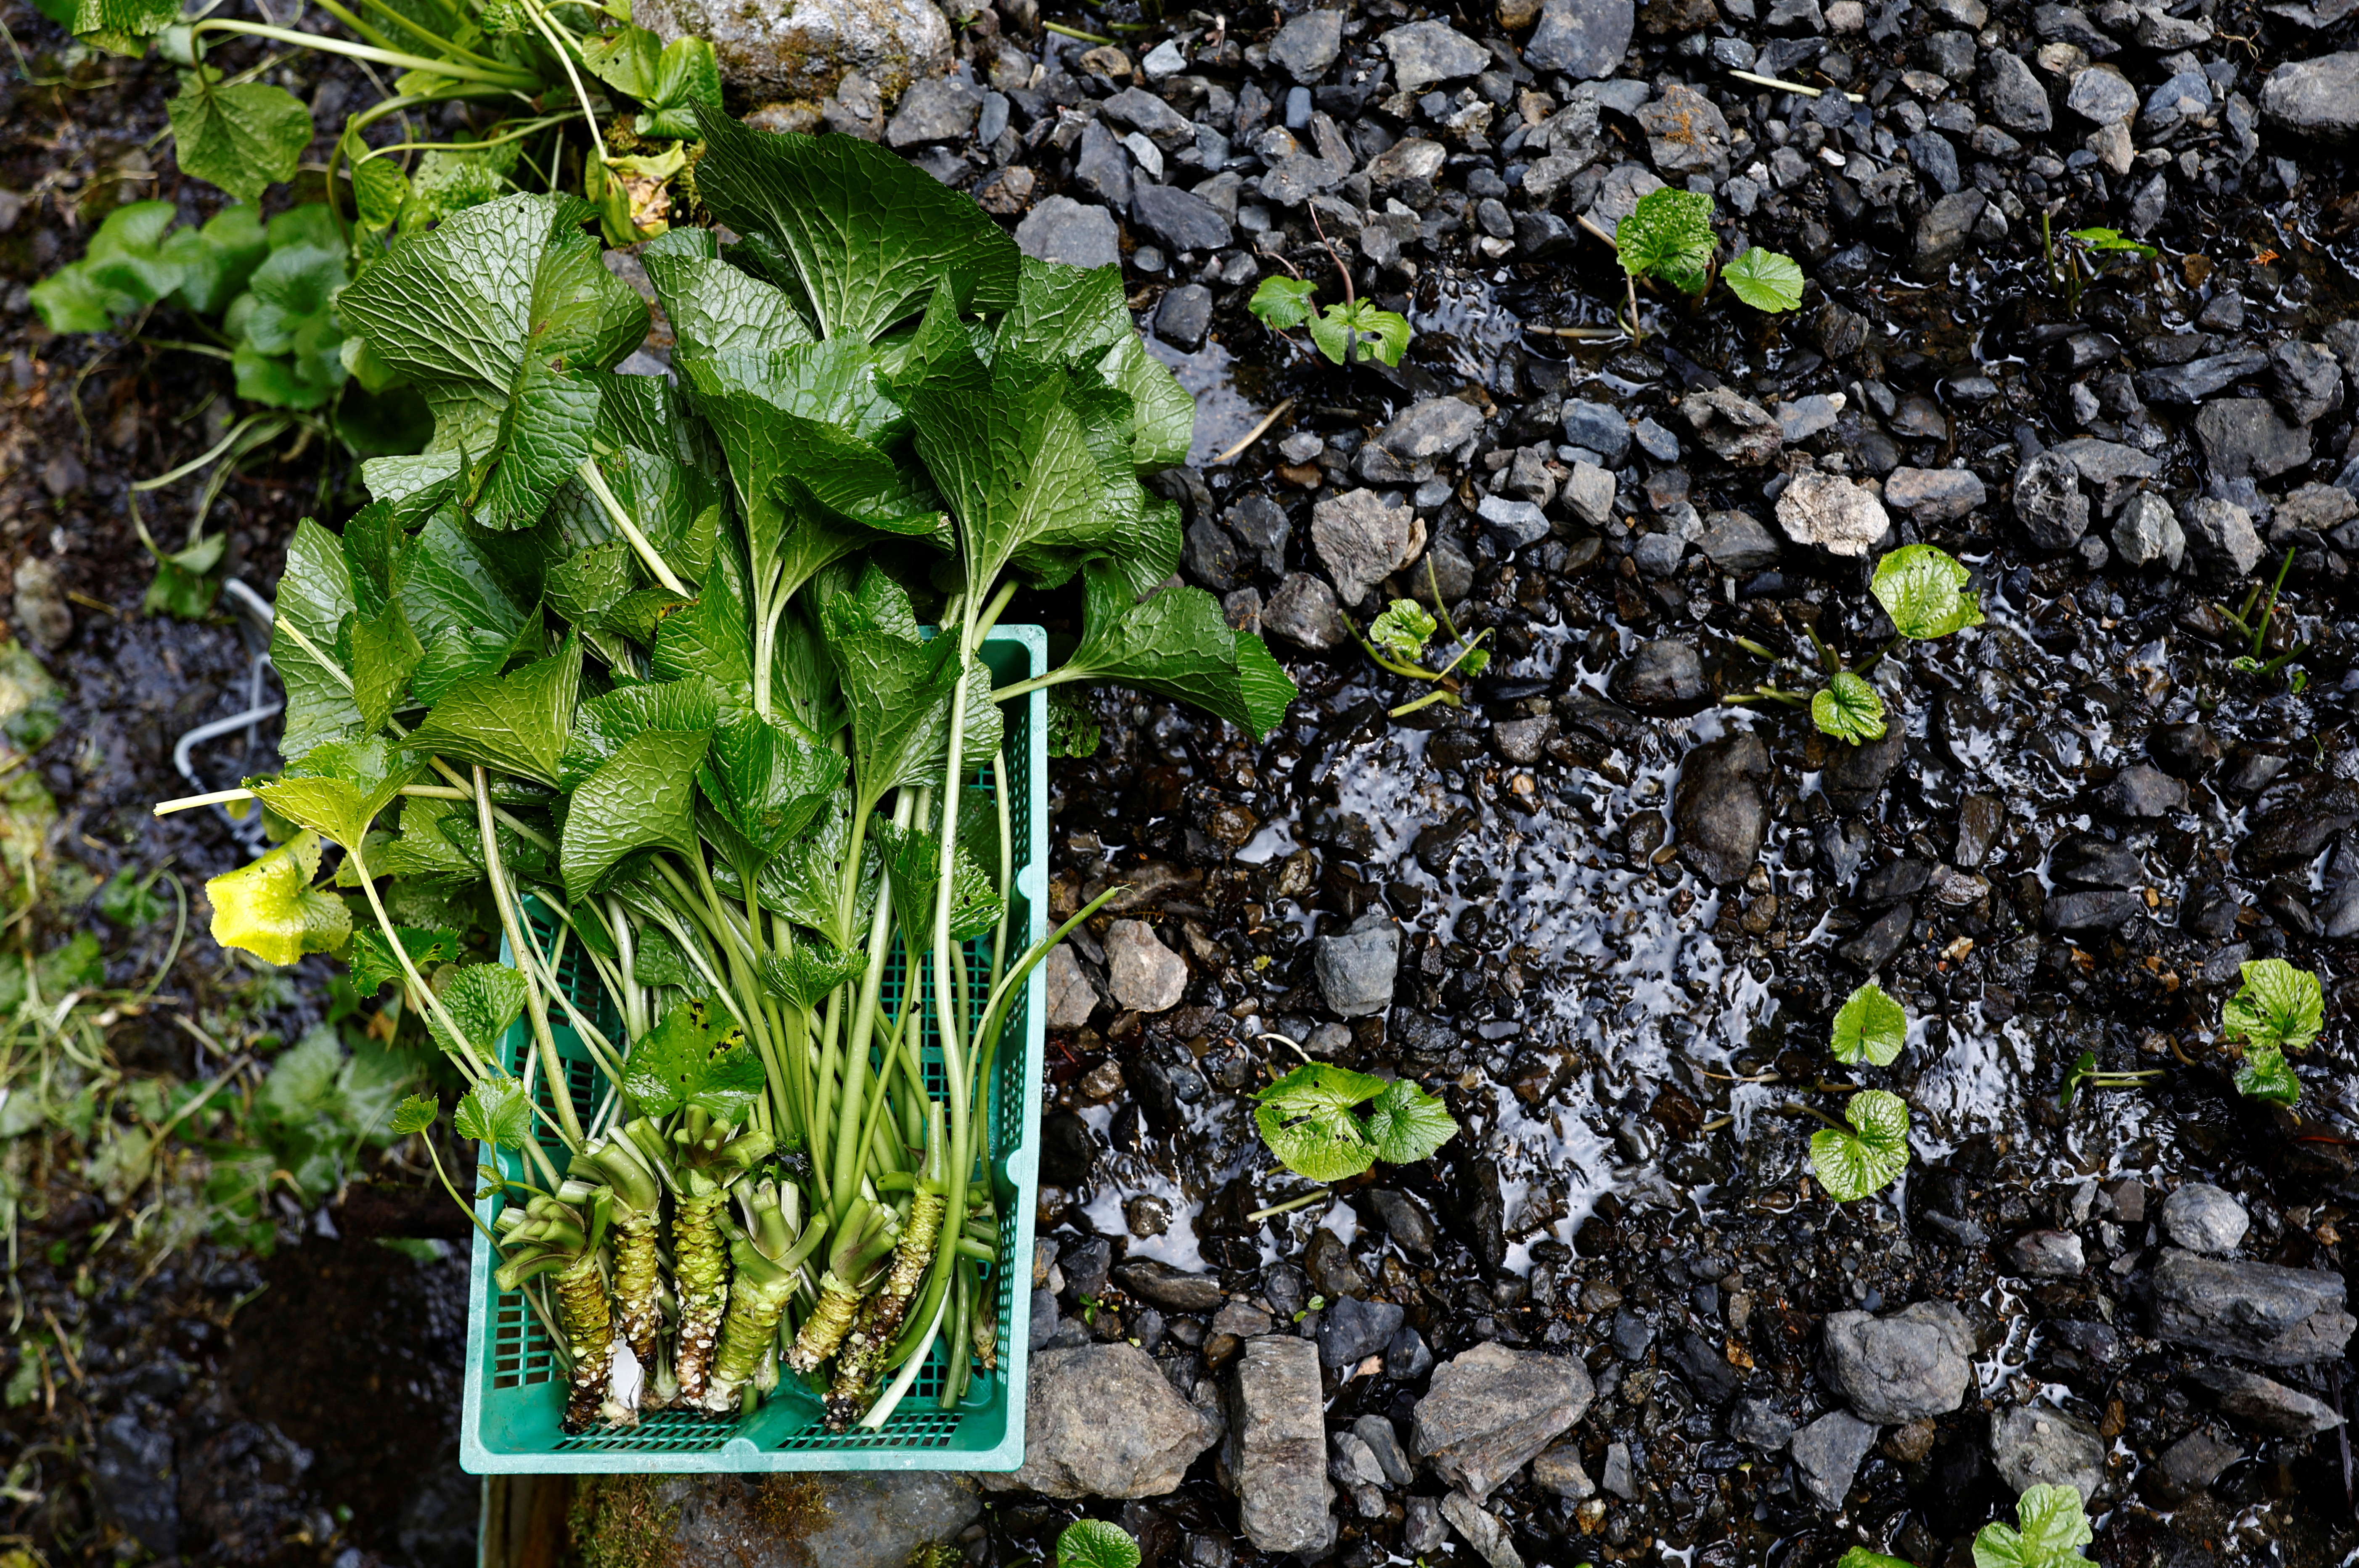 Newly harvested wasabi roots are kept in a basket in a field on Masahiro Hoshina's farm in Okutama Town